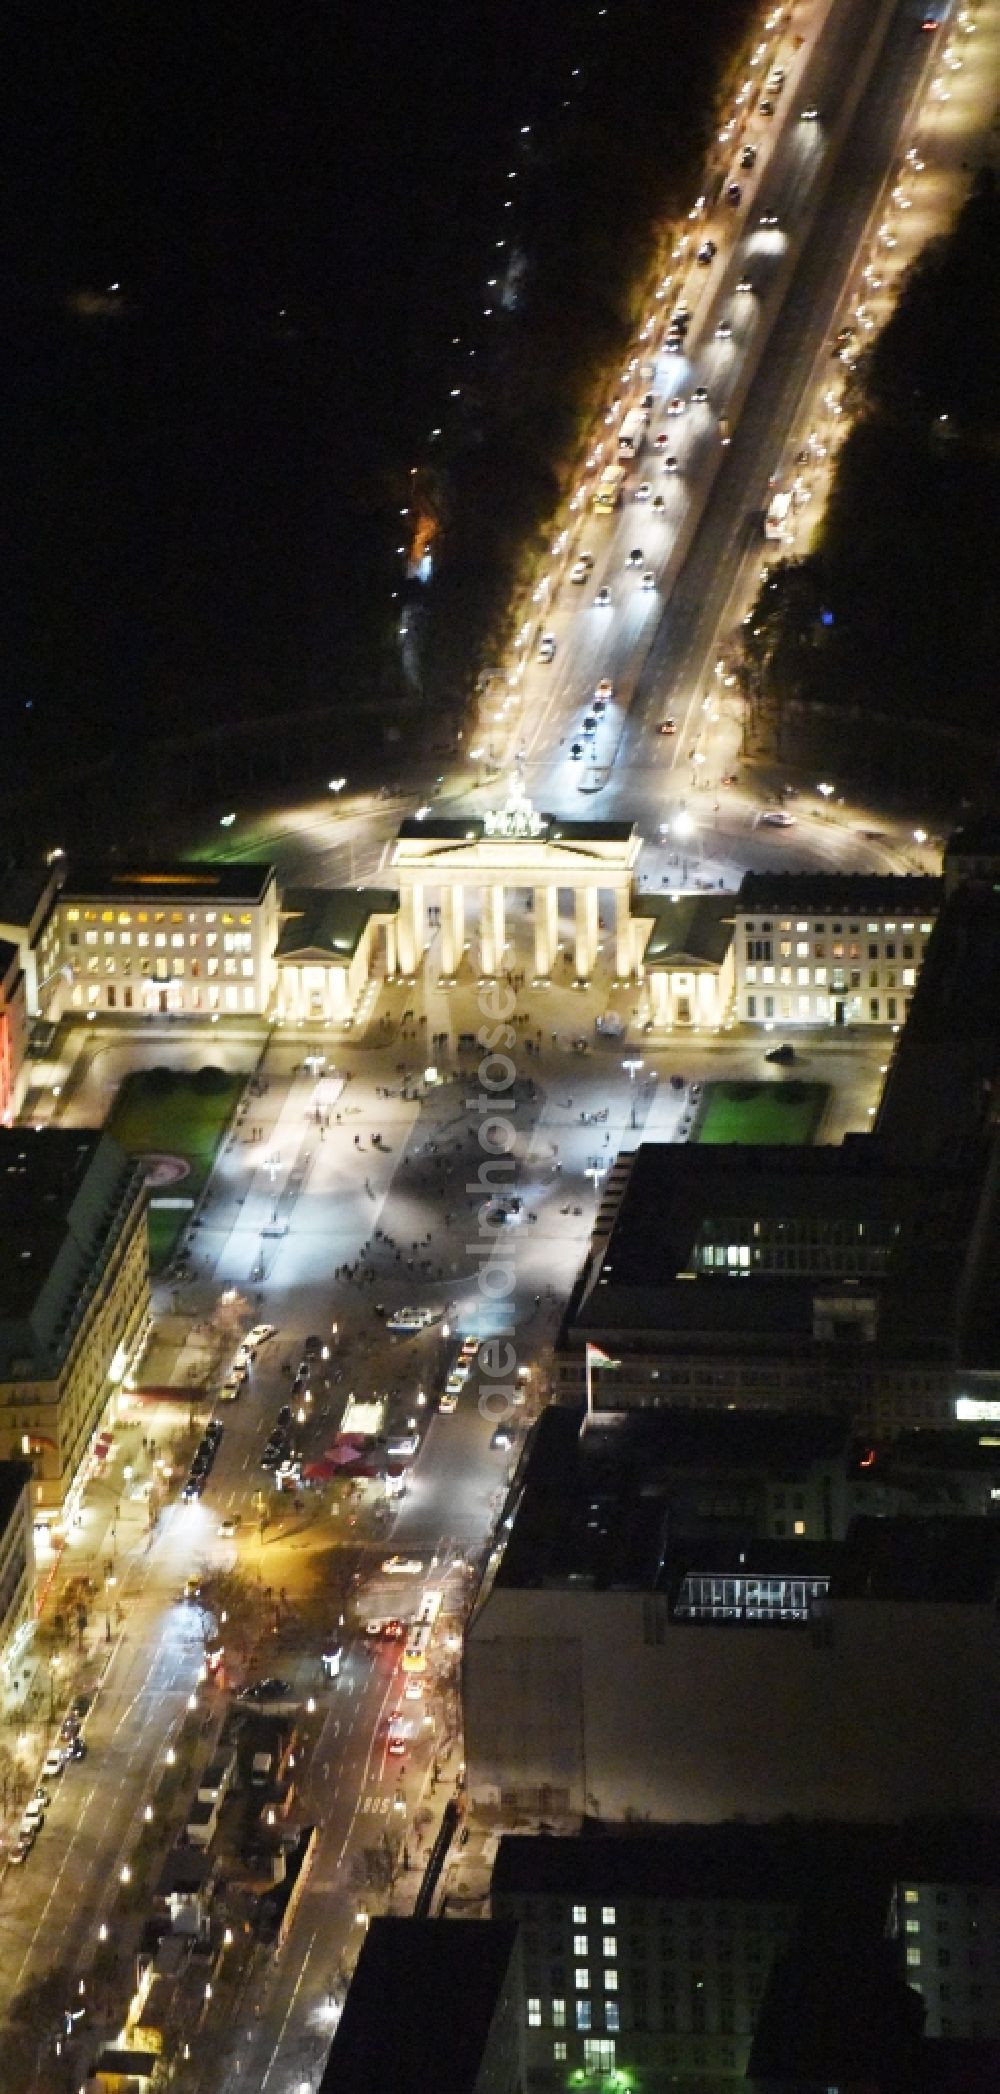 Berlin at night from above - Night view of the Brandenburg Gate at the Pariser Platz in Berlin